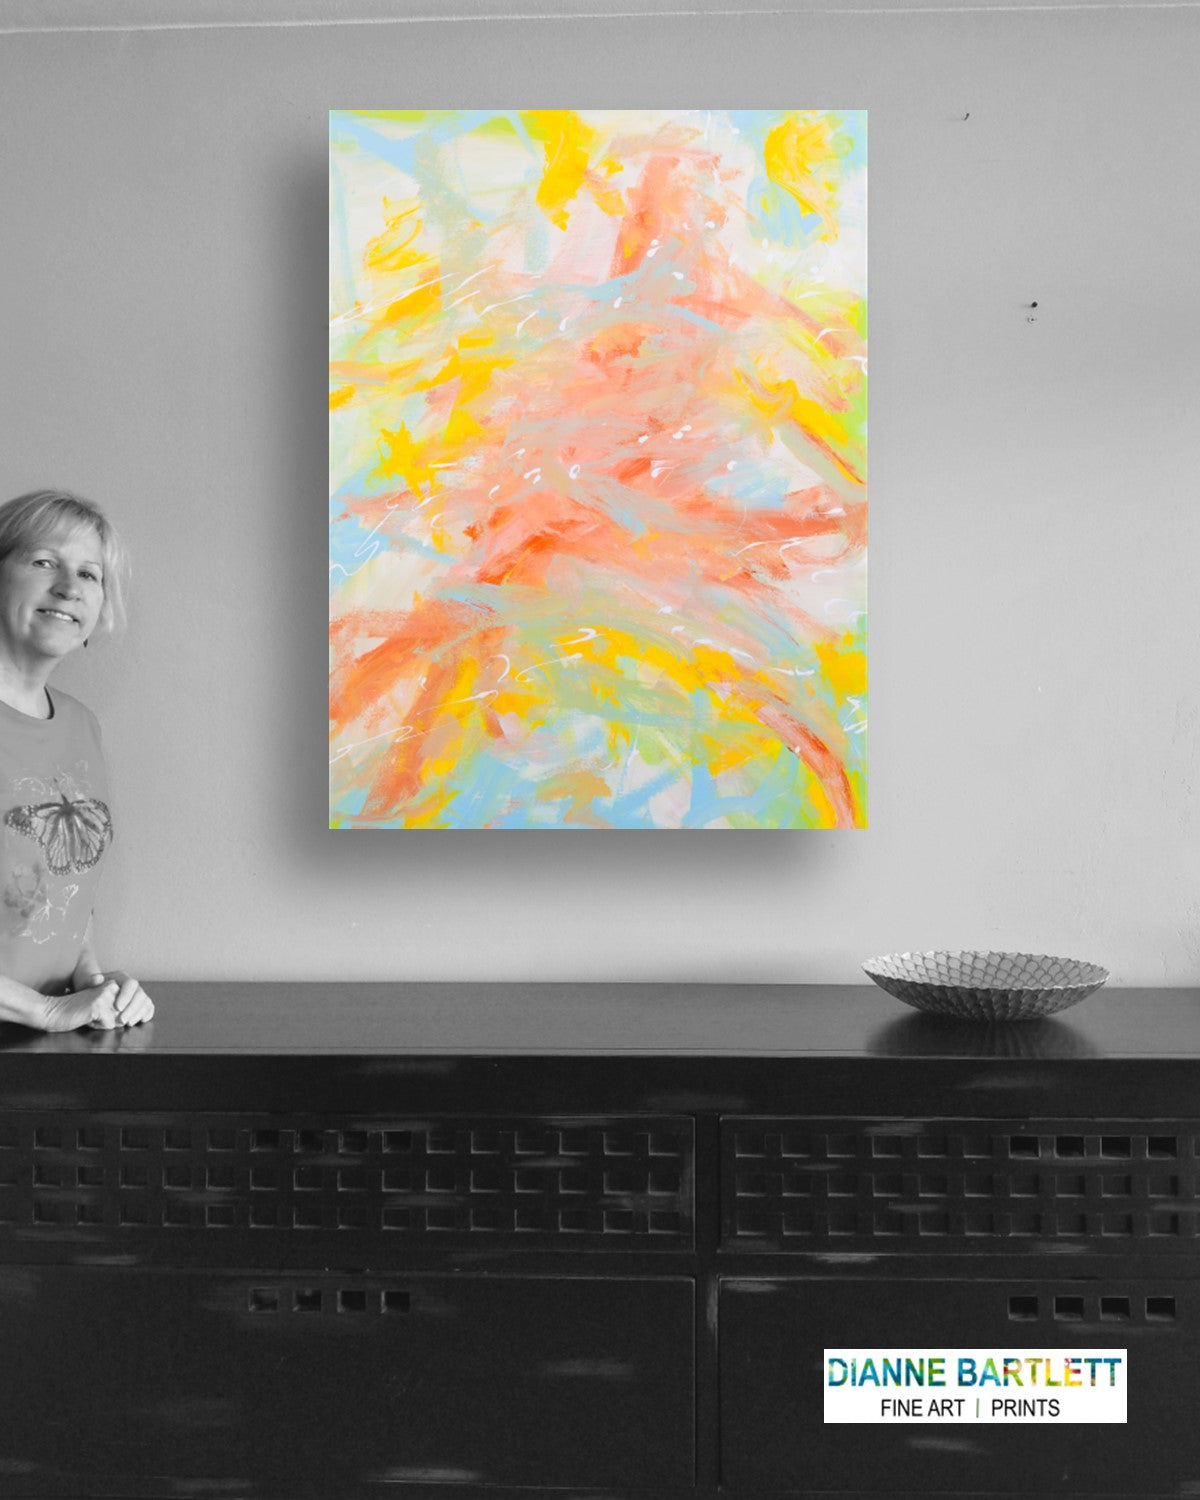 Off-Handed Remark - Original Abstract Painting in Austin Texas 30" x 40"